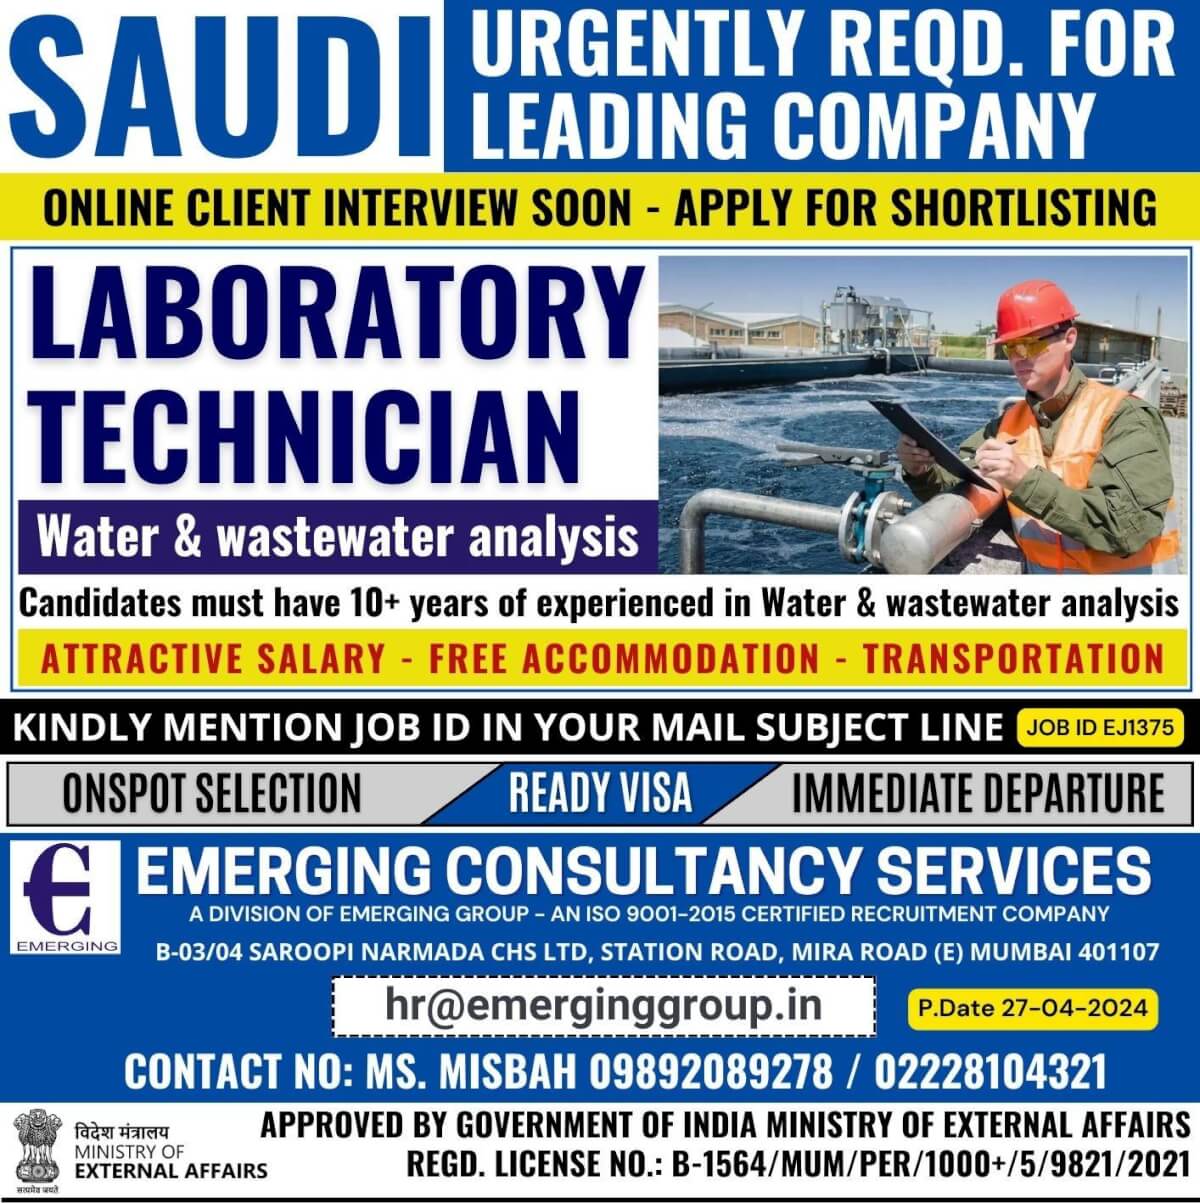 URGENTLY REQUIRED FOR WATER TREATMENT PLANT IN SAUDI ARABIA